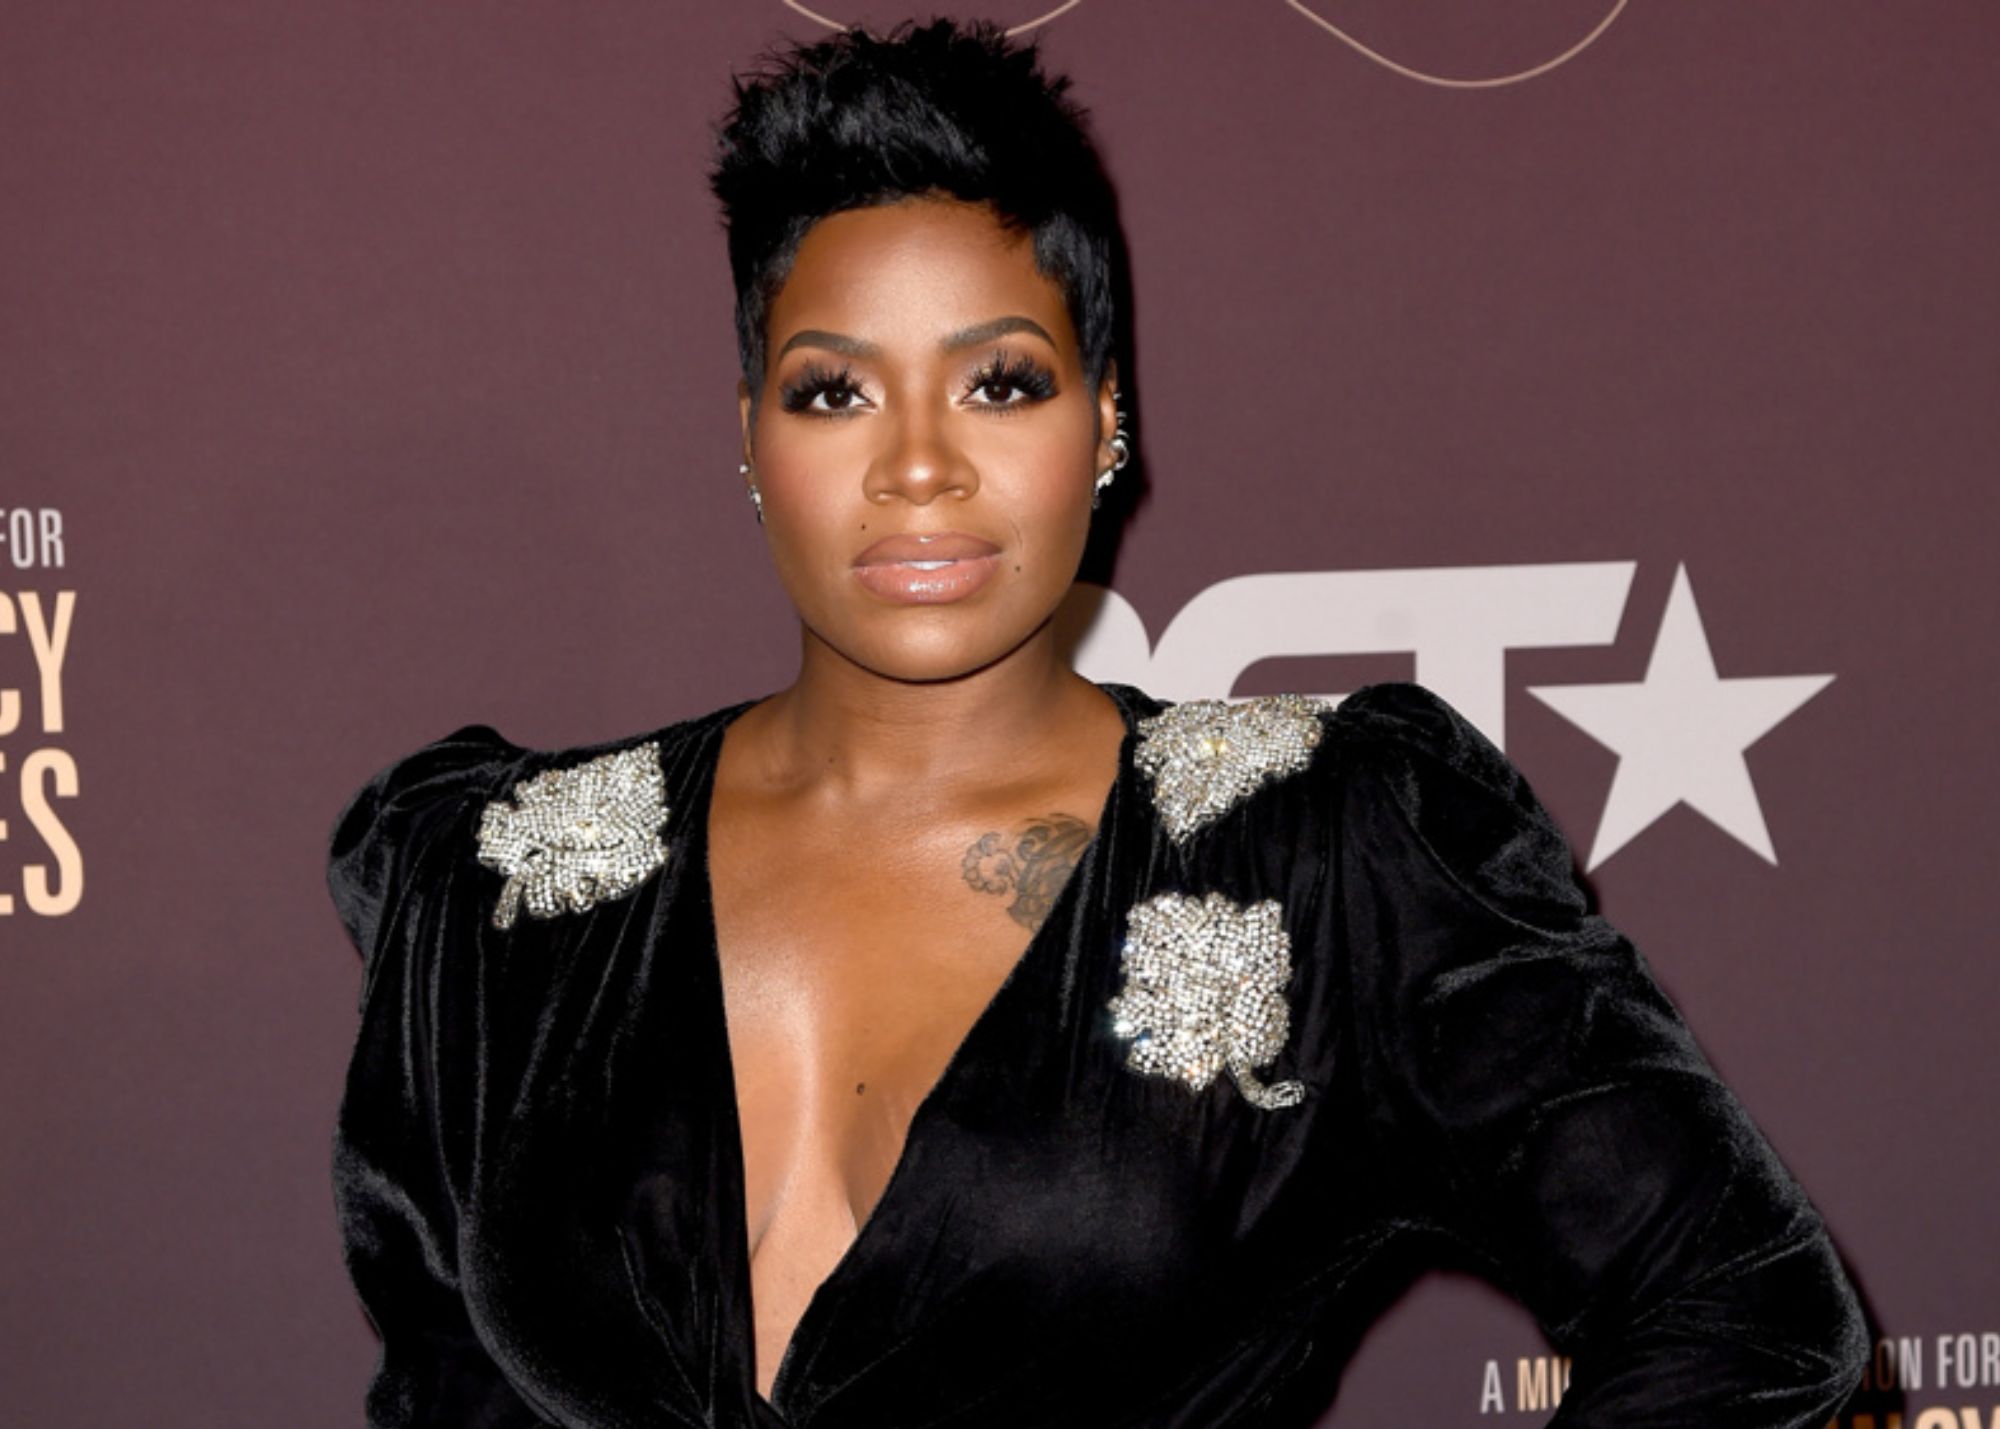 Fantasia Barrino is dressed in a gleaming black gown with crytal beads on the shoulder